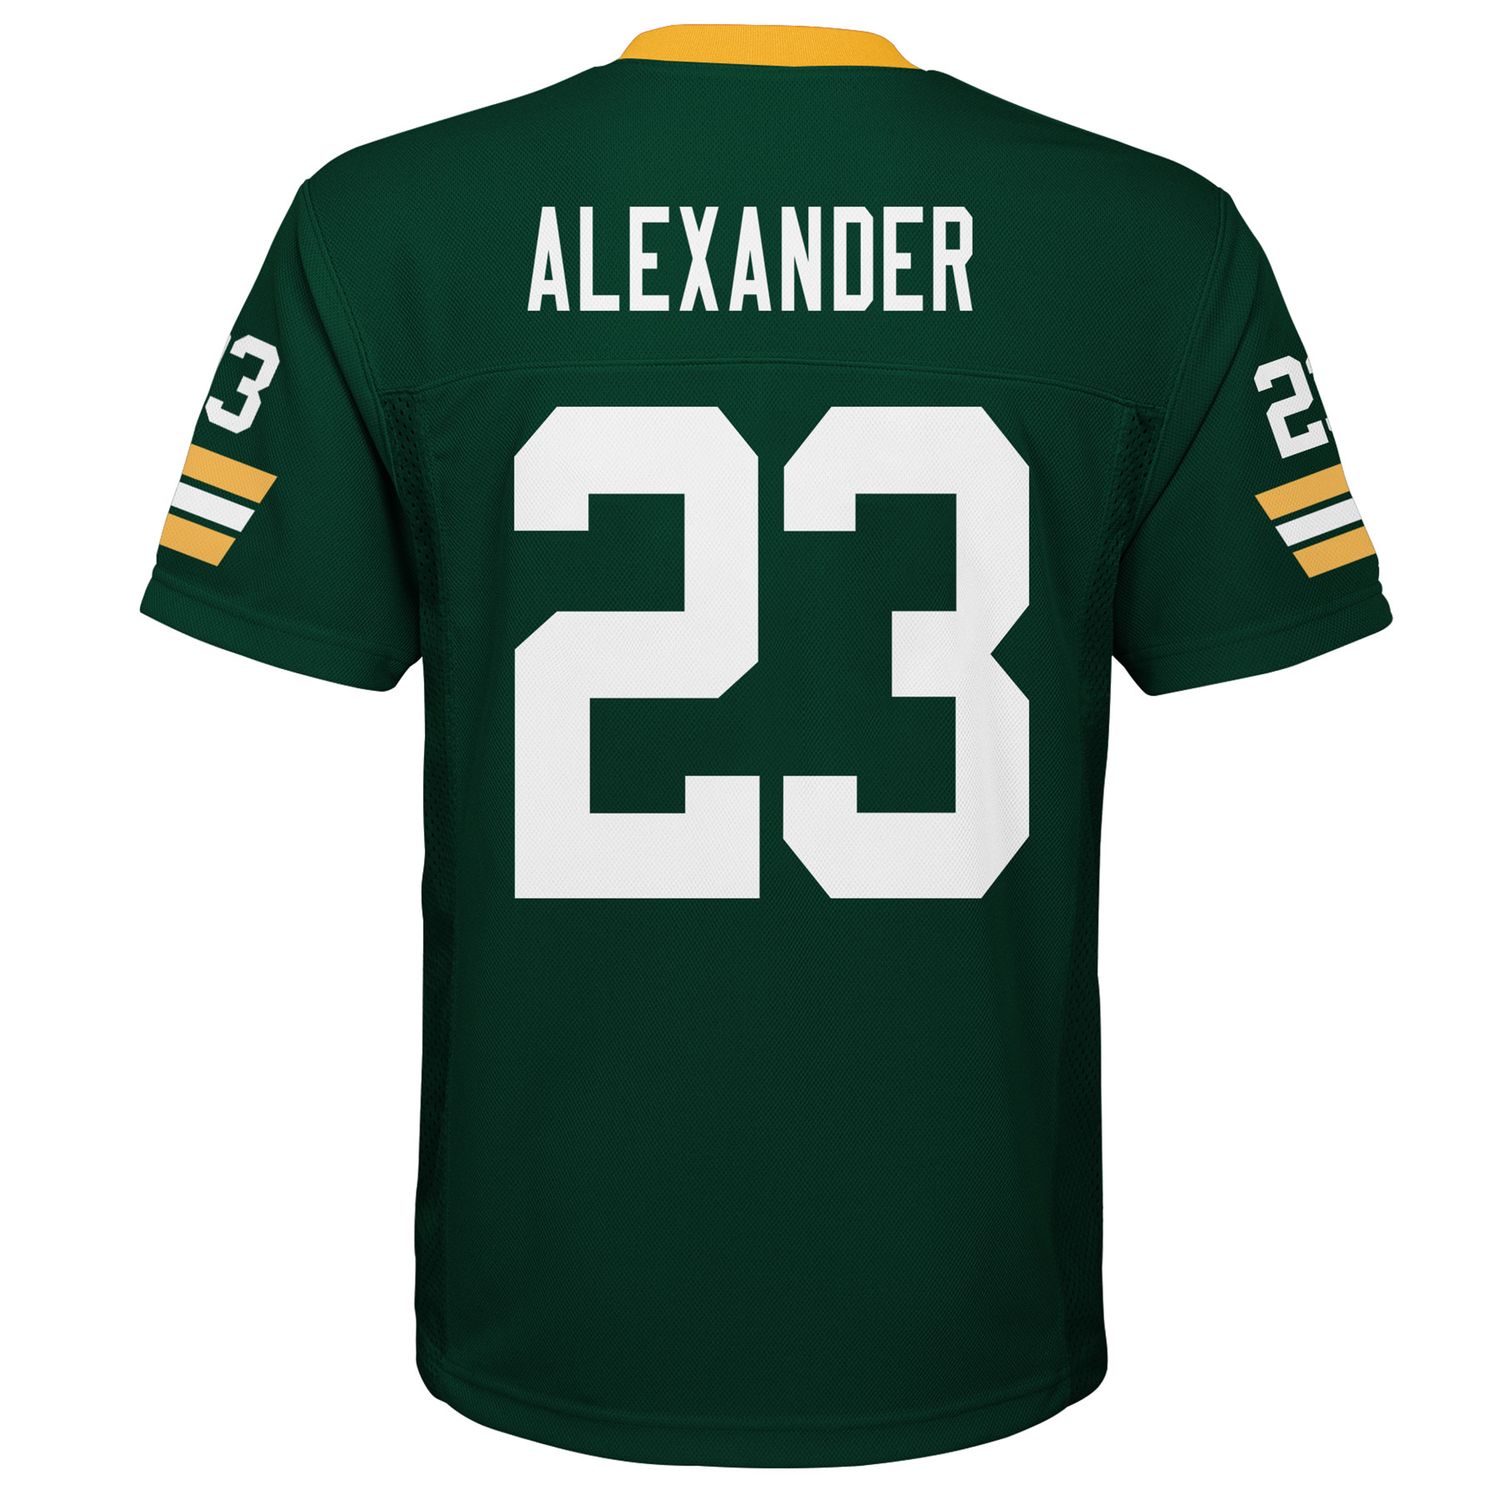 jaire alexander youth jersey